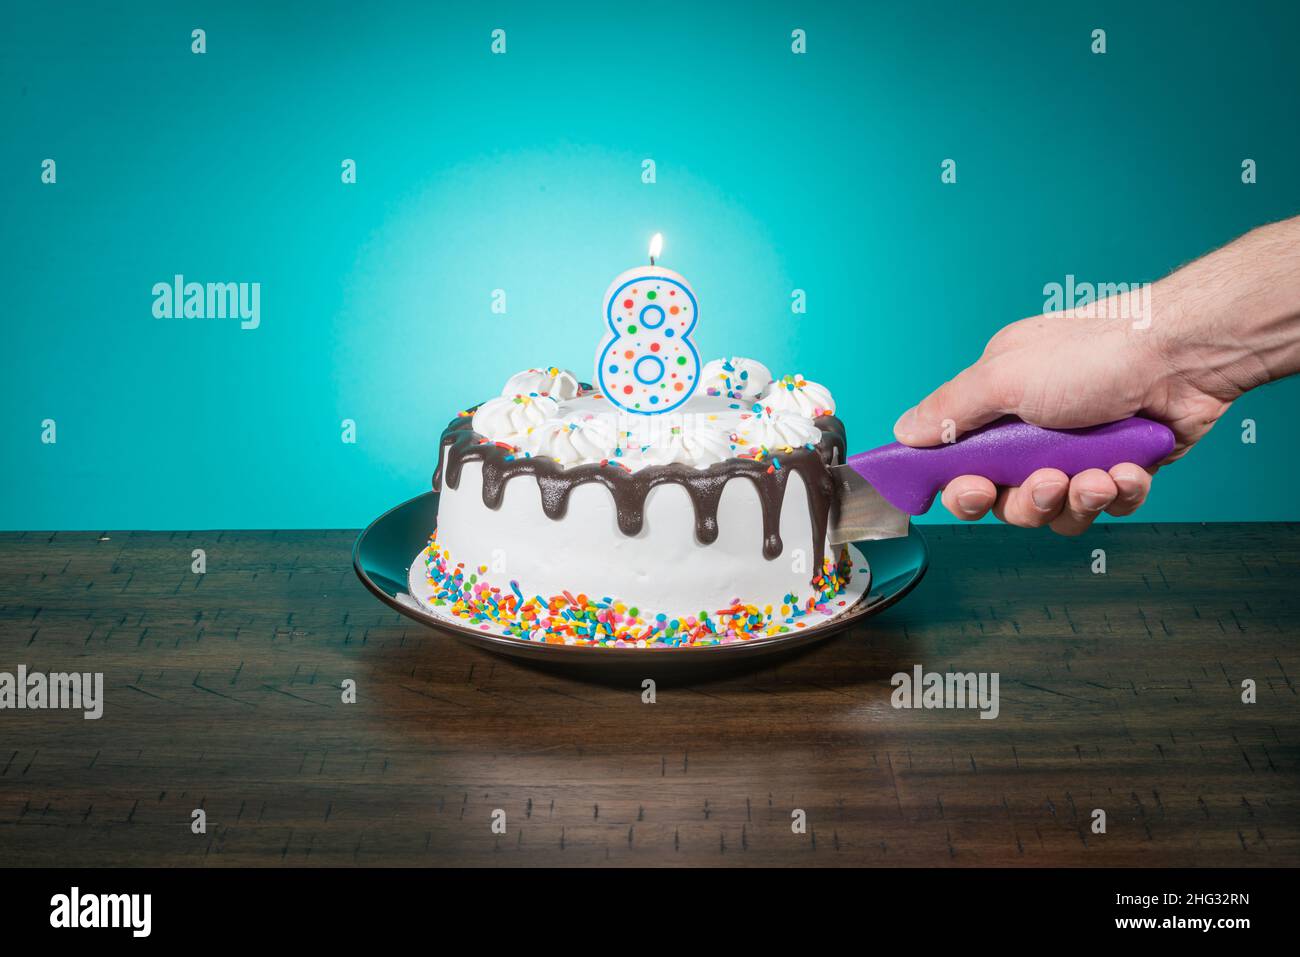 A birthday cake bears a candle in the shape of the number 8 while a hand cuts a slice. Stock Photo